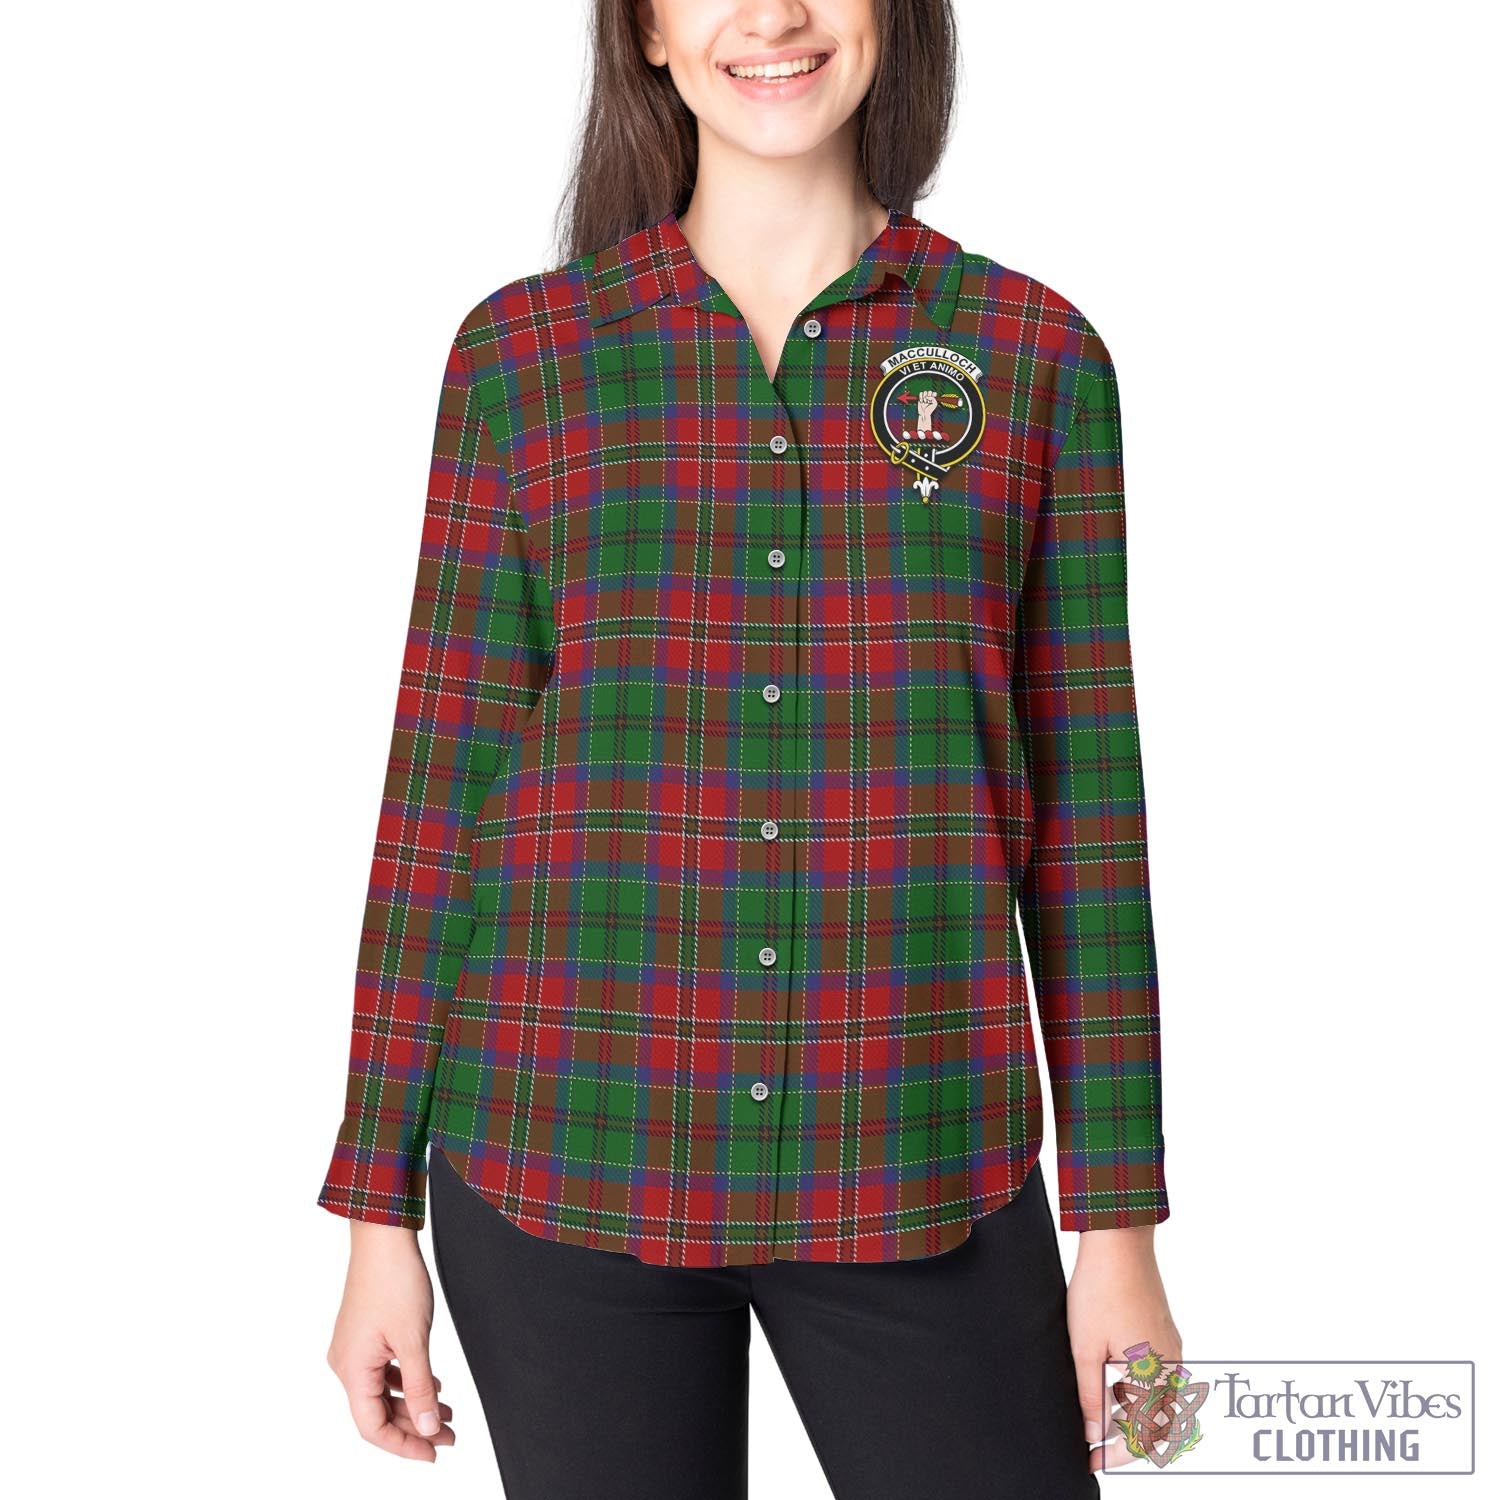 Tartan Vibes Clothing MacCulloch Tartan Womens Casual Shirt with Family Crest